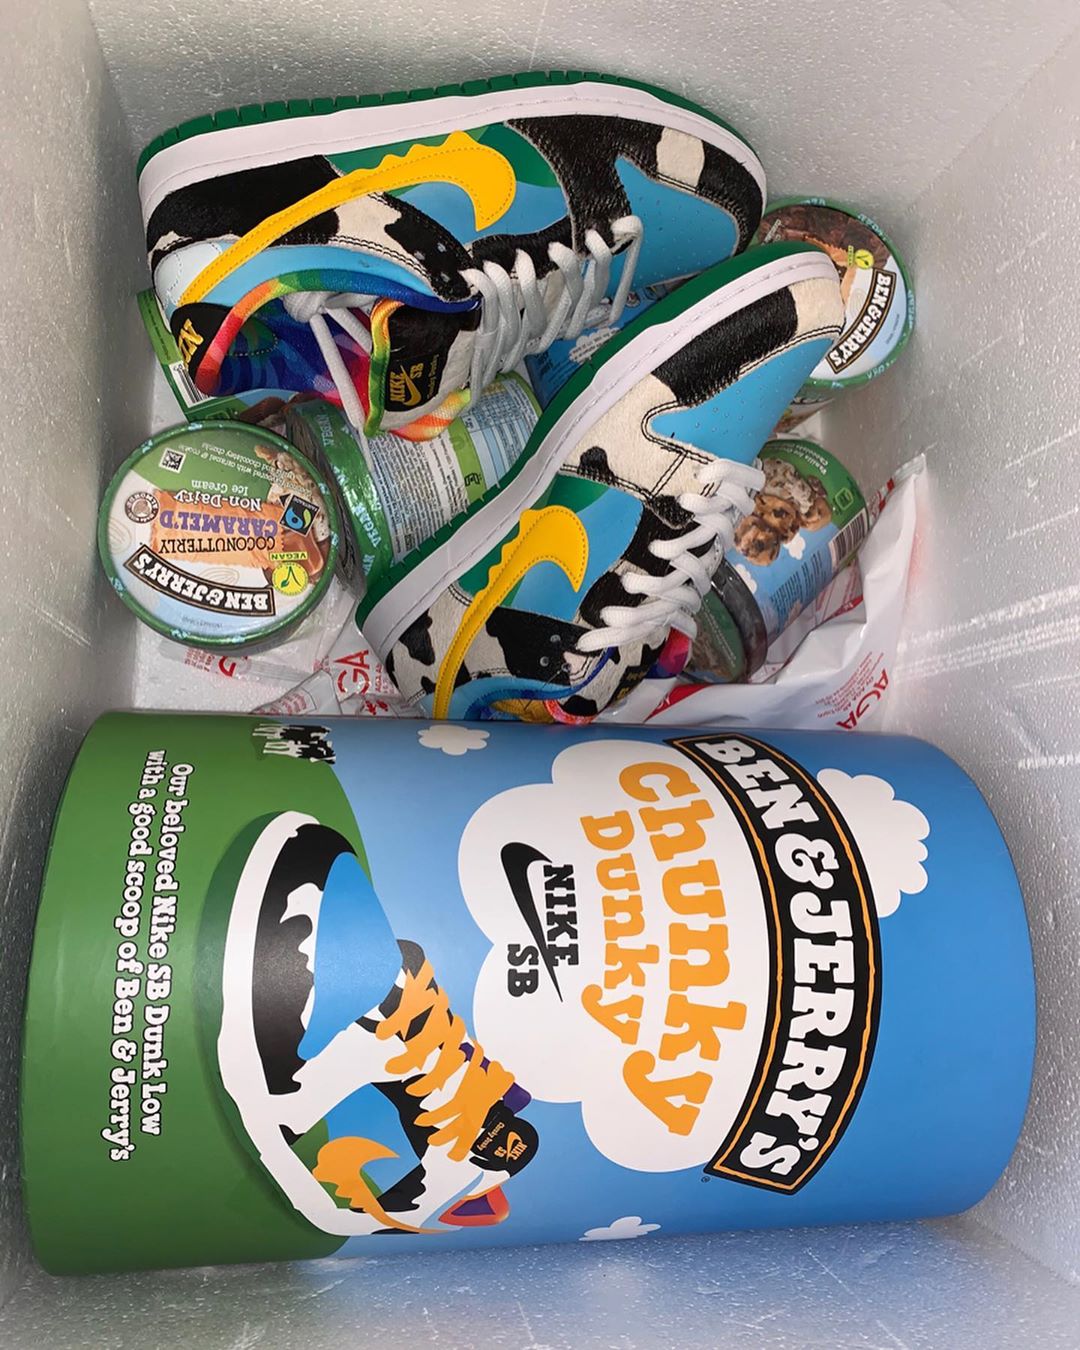 ben and jerry dunks shoe box